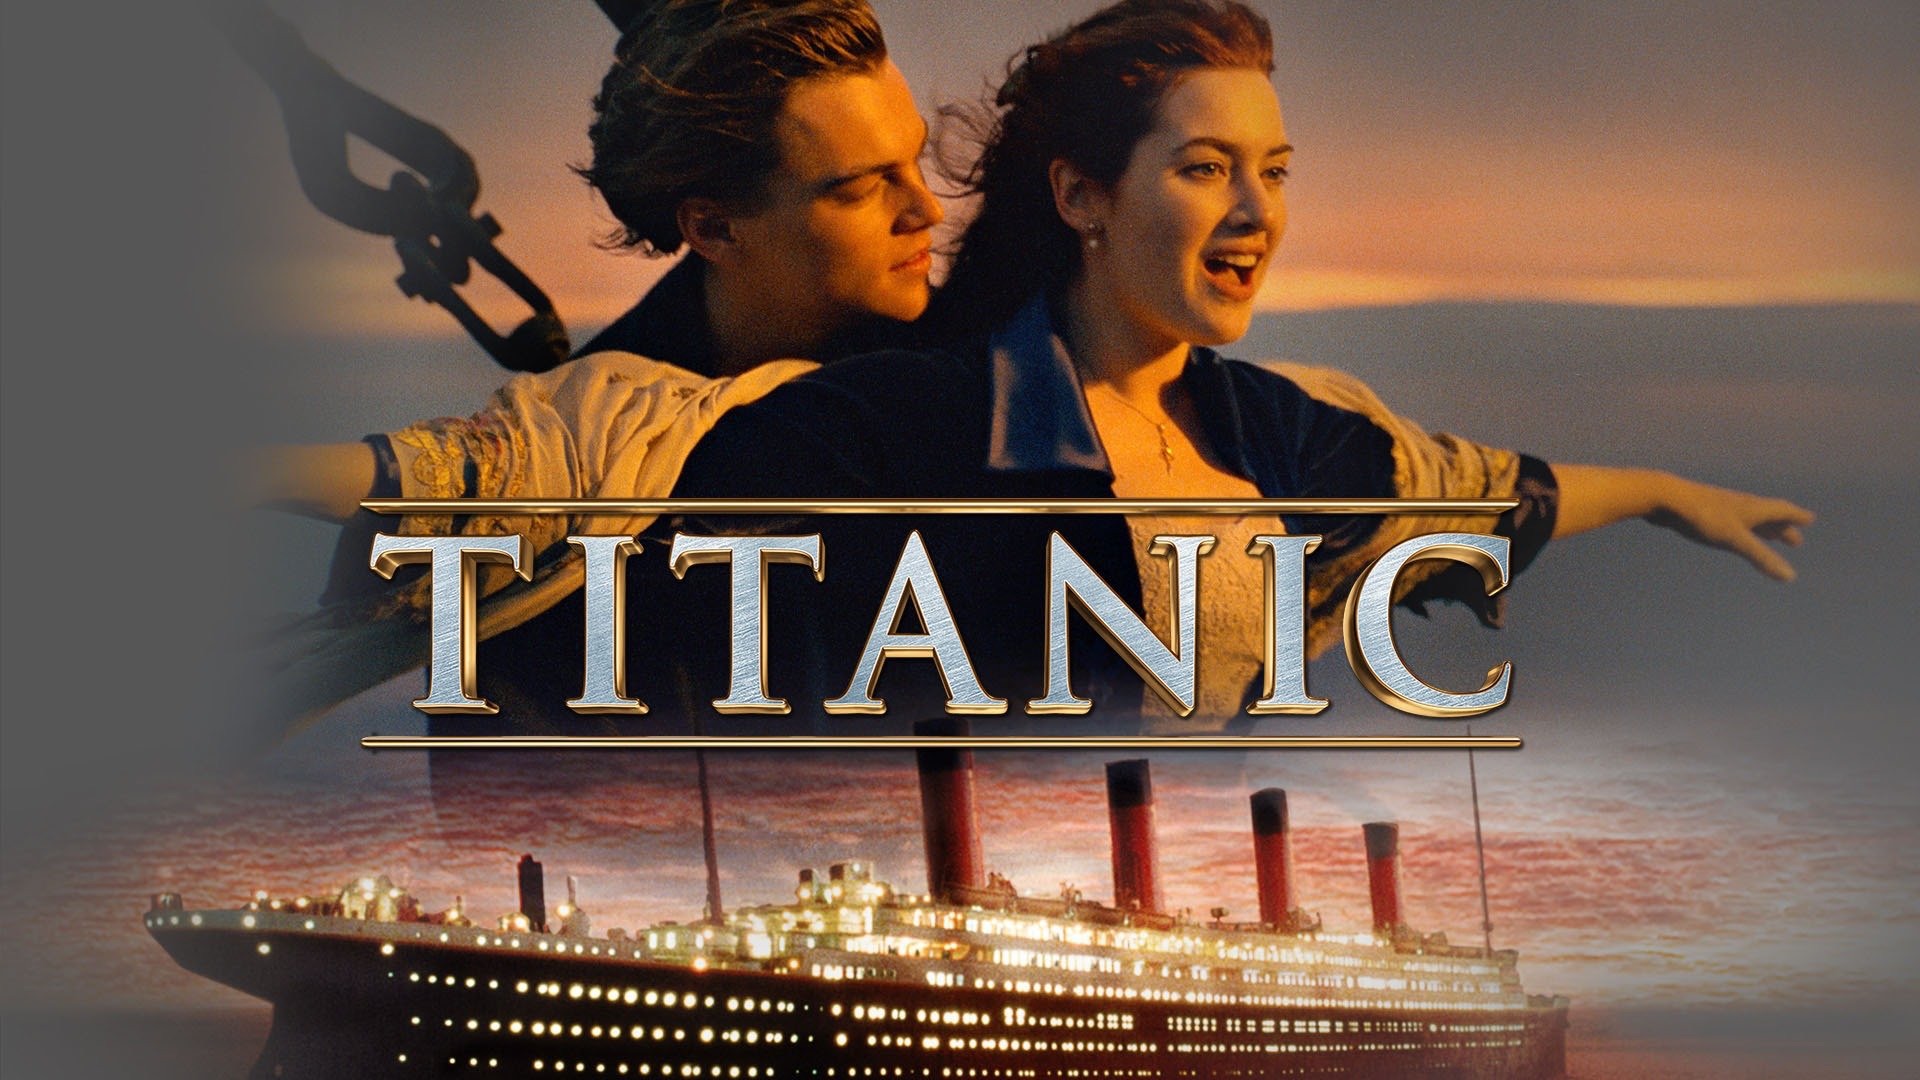 titanic full movie online free without download